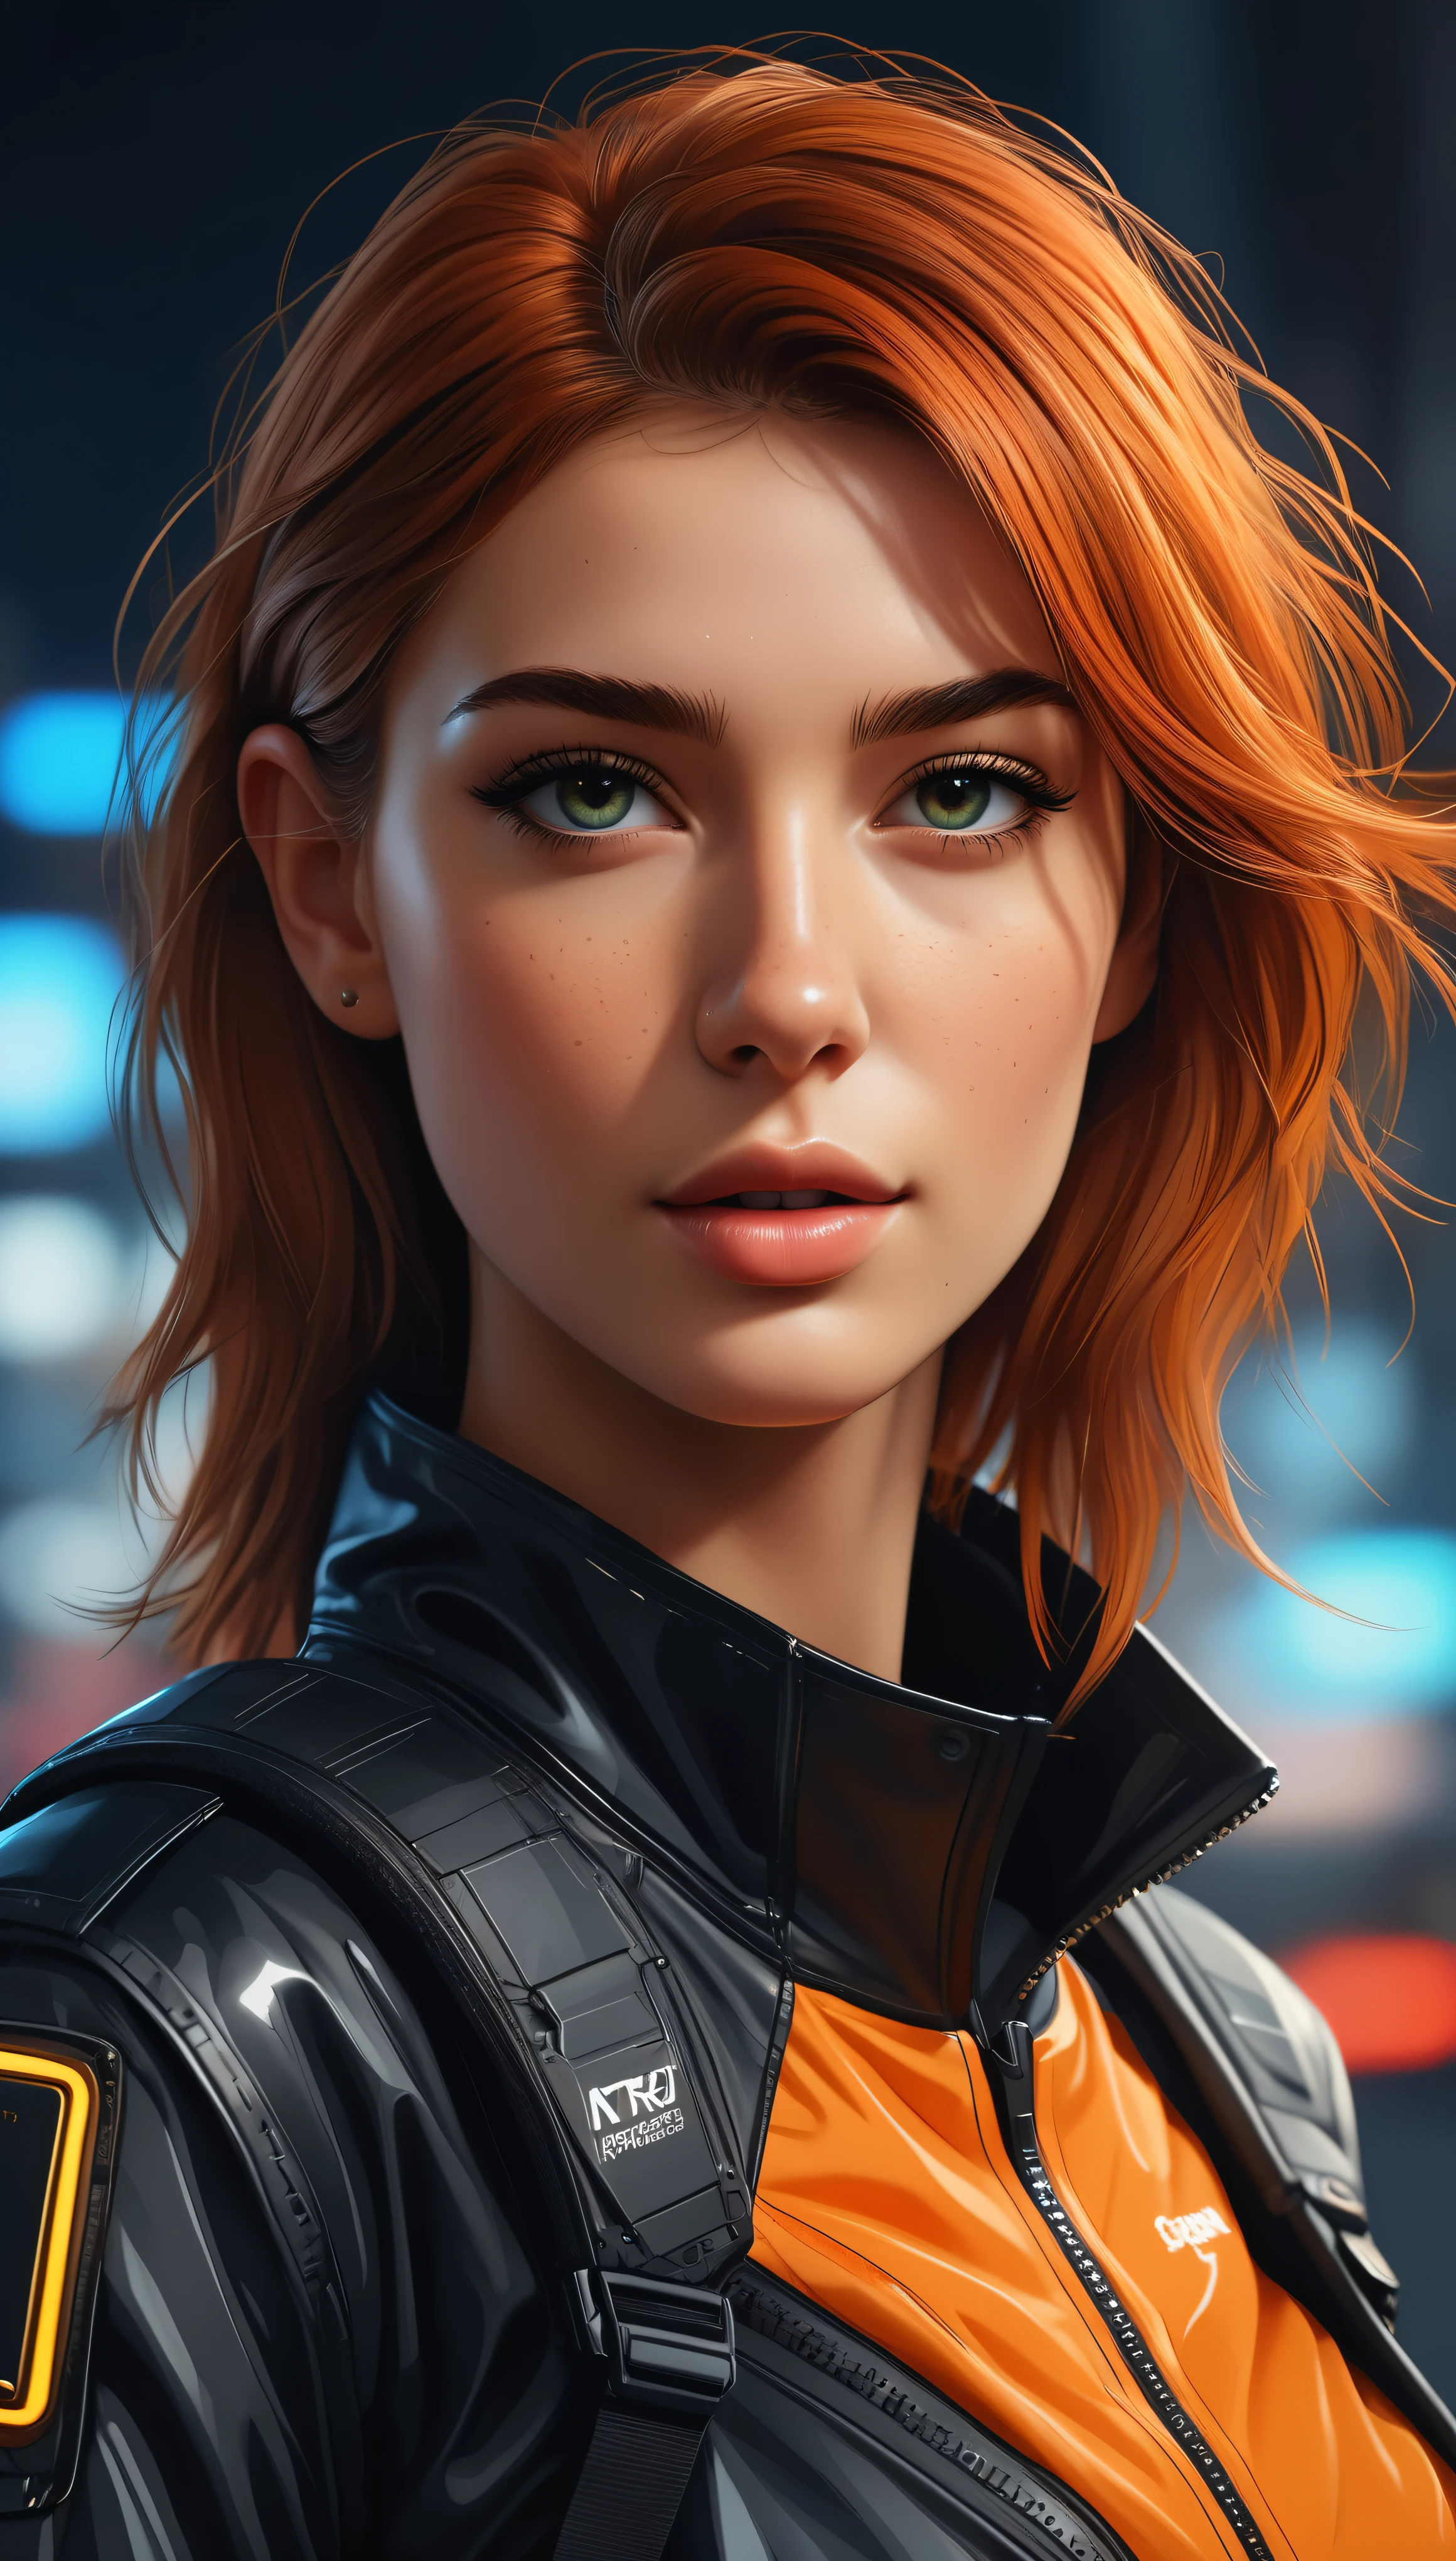 ((Masterpiece in maximum 16K resolution):1.6), ((vector cartoon illustration:)1.5), ((Vector art):1.4), ((Geometric style and minimalism):1.5), ((Wide angle painting):1.2) | (Cyberpunk Vector Art of a Fresh Supermodel beauty in Paris), (Cyberpunk Fresh French Supermodel beauty), (Dynamic Pose), (Cute Freckles), (Red Hair), (Golden Ratio Face), (Cute Freckles), (visual experience), award-winning graphics, extremely detailed, Digital Art, rtx, Unreal Engine, All drawn with sharp focus. Rendered in ultra-high definition with UHD and retina quality, this masterpiece ensures anatomical correctness and textured skin with super detail. With a focus on high quality and accuracy, this award-winning portrayal captures every nuance in stunning 16k resolution, immersing viewers in its lifelike depiction. Avoid extreme angles or exaggerated expressions to maintain realism. ((perfect_composition, perfect_design, perfect_layout, perfect_detail, ultra_detailed)), ((enhance_all, fix_everything)), More Detail, Enhance. 